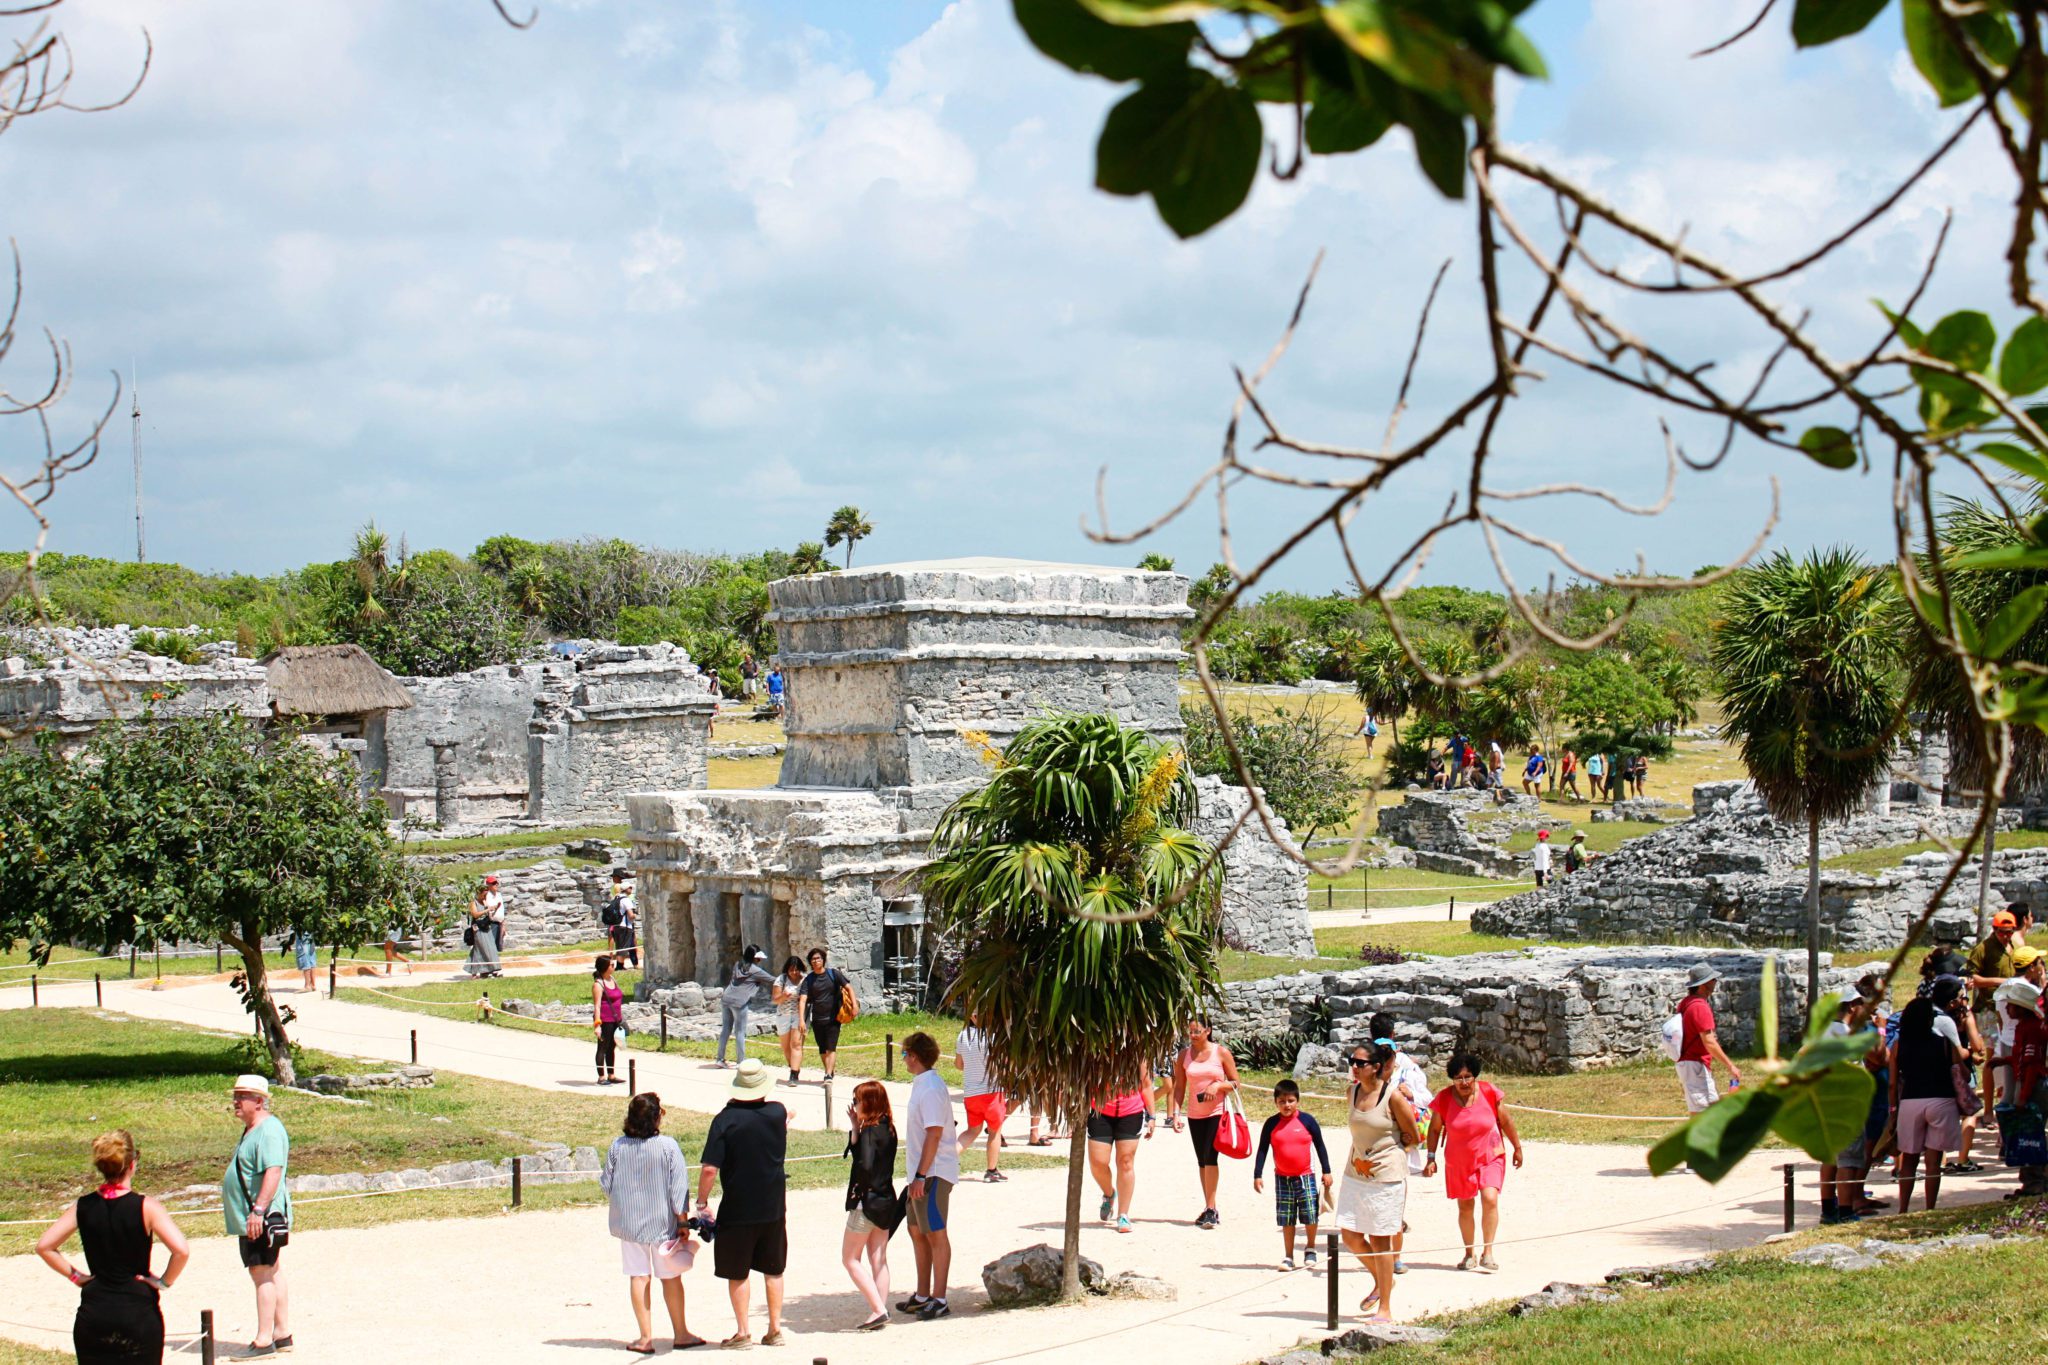 The seaside ruins of Tulum are one of the most photographed sites in Mexico- Top 7 Playa del Carmen activities #playadelcarmen #mexico #tulum